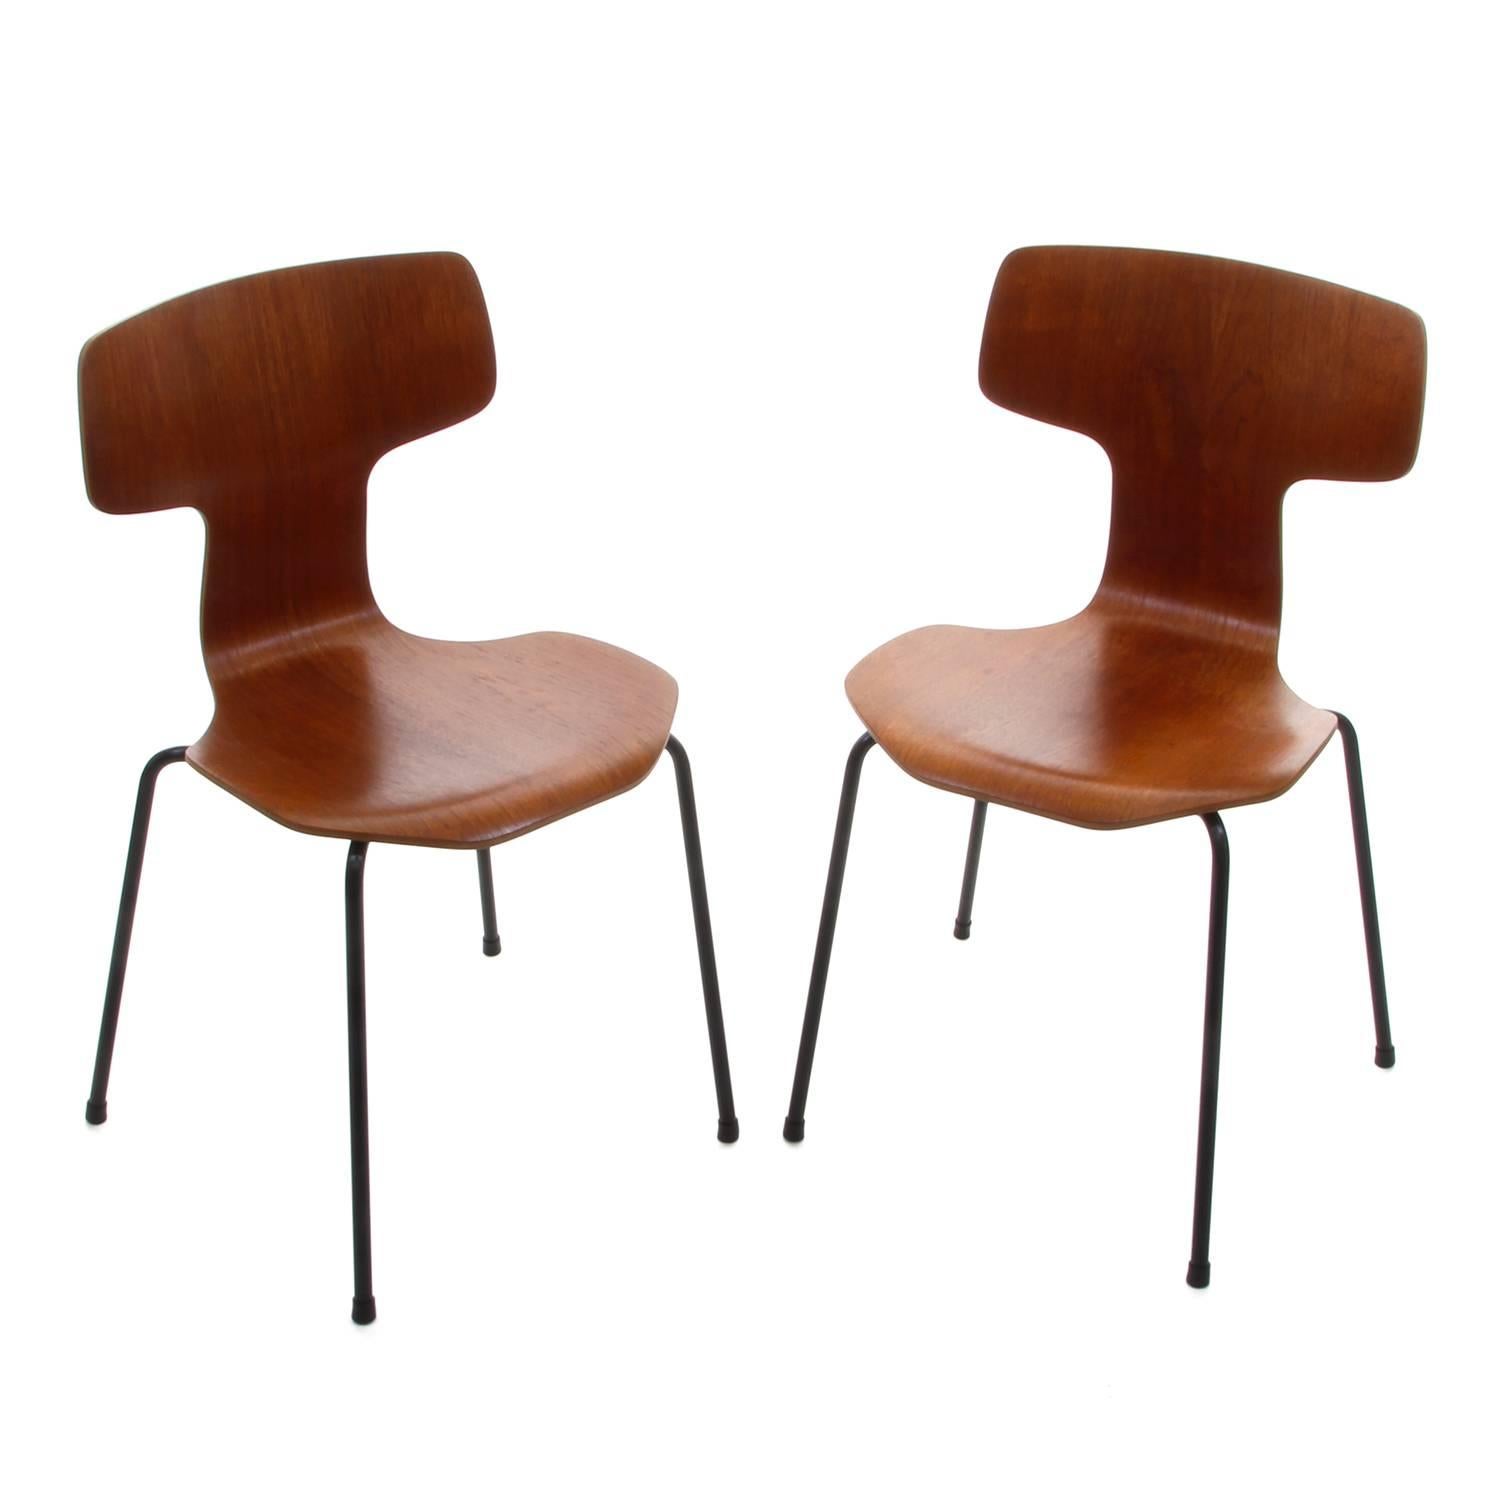 Teak T-Chairs, pair of model 3103 chairs by Arne Jacobsen in 1957 for Fritz Hansen, Danish Mid-Century Modern dining chairs, original vintage editions in excellent vintage condition.

The 3103 or T-chair is, like its predecessors the Ant chair and